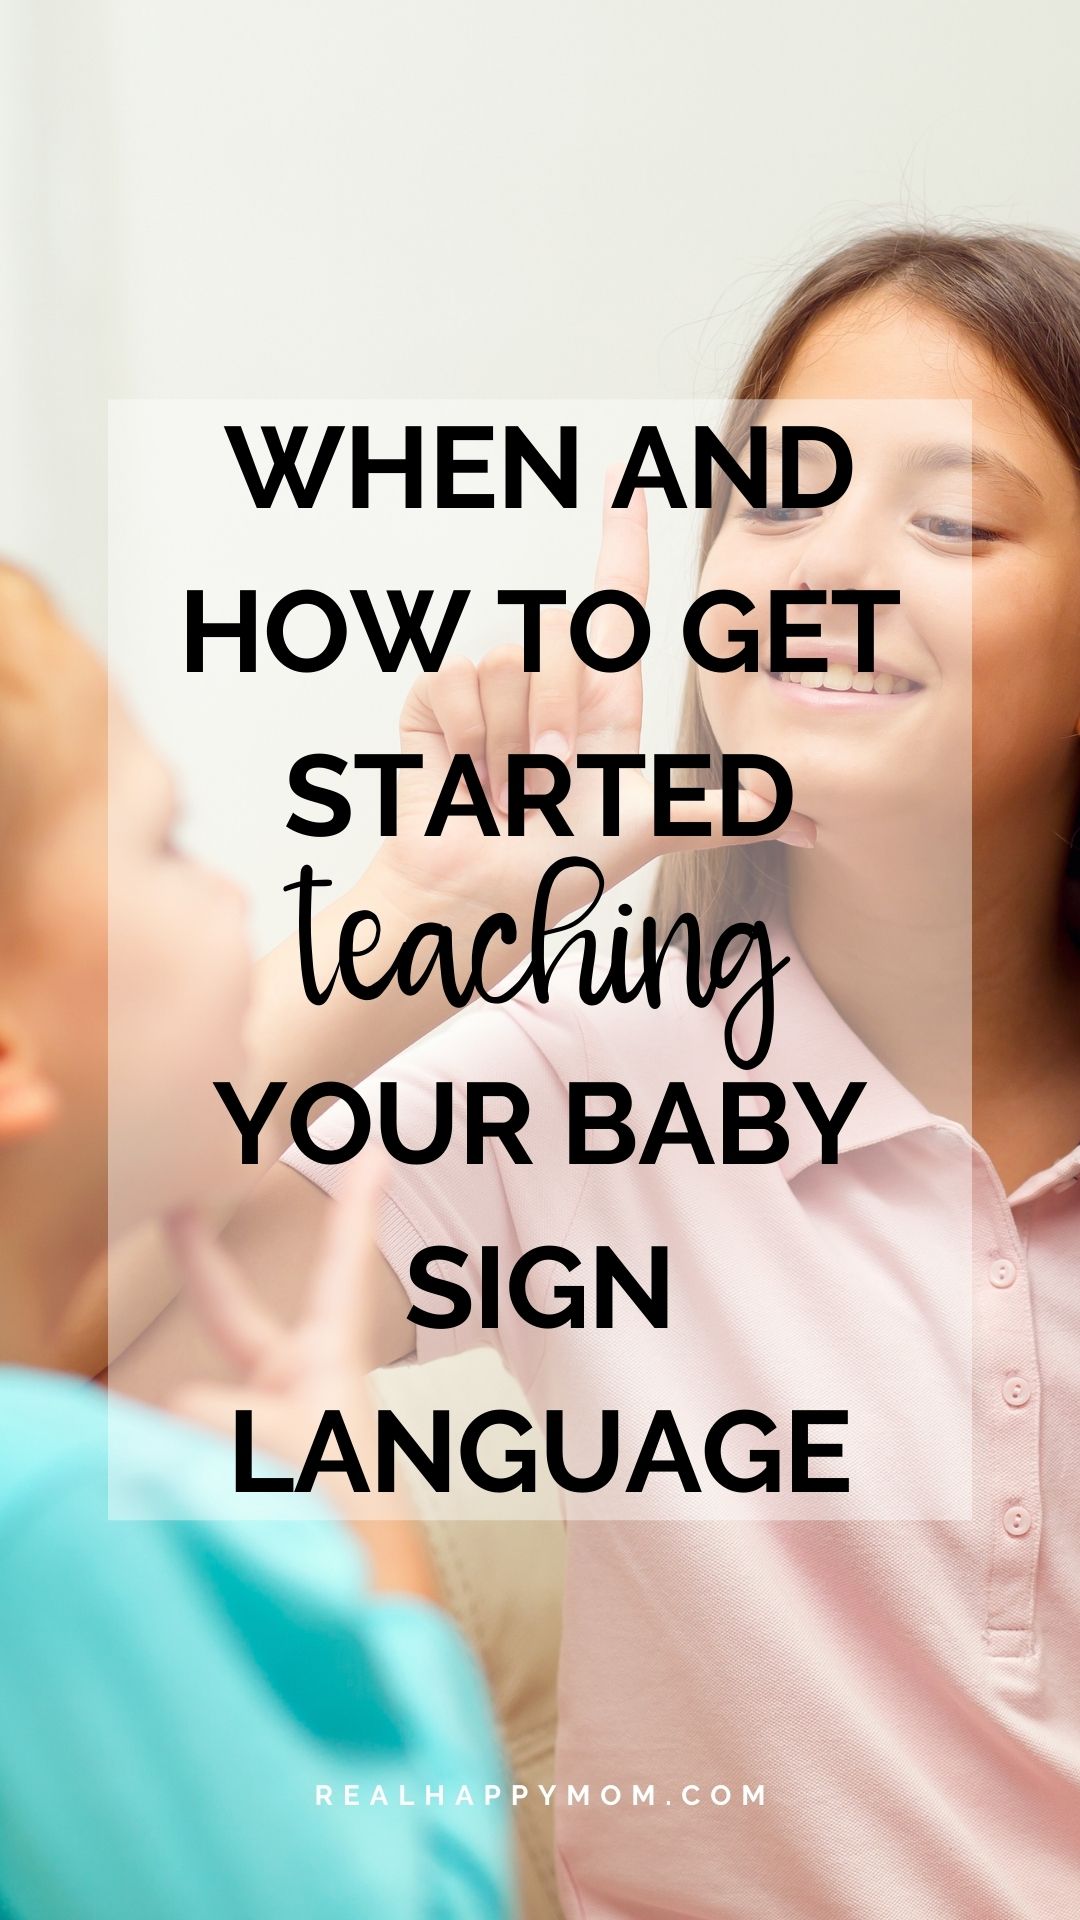 When and How to Get Started Teaching Your Baby Sign Language